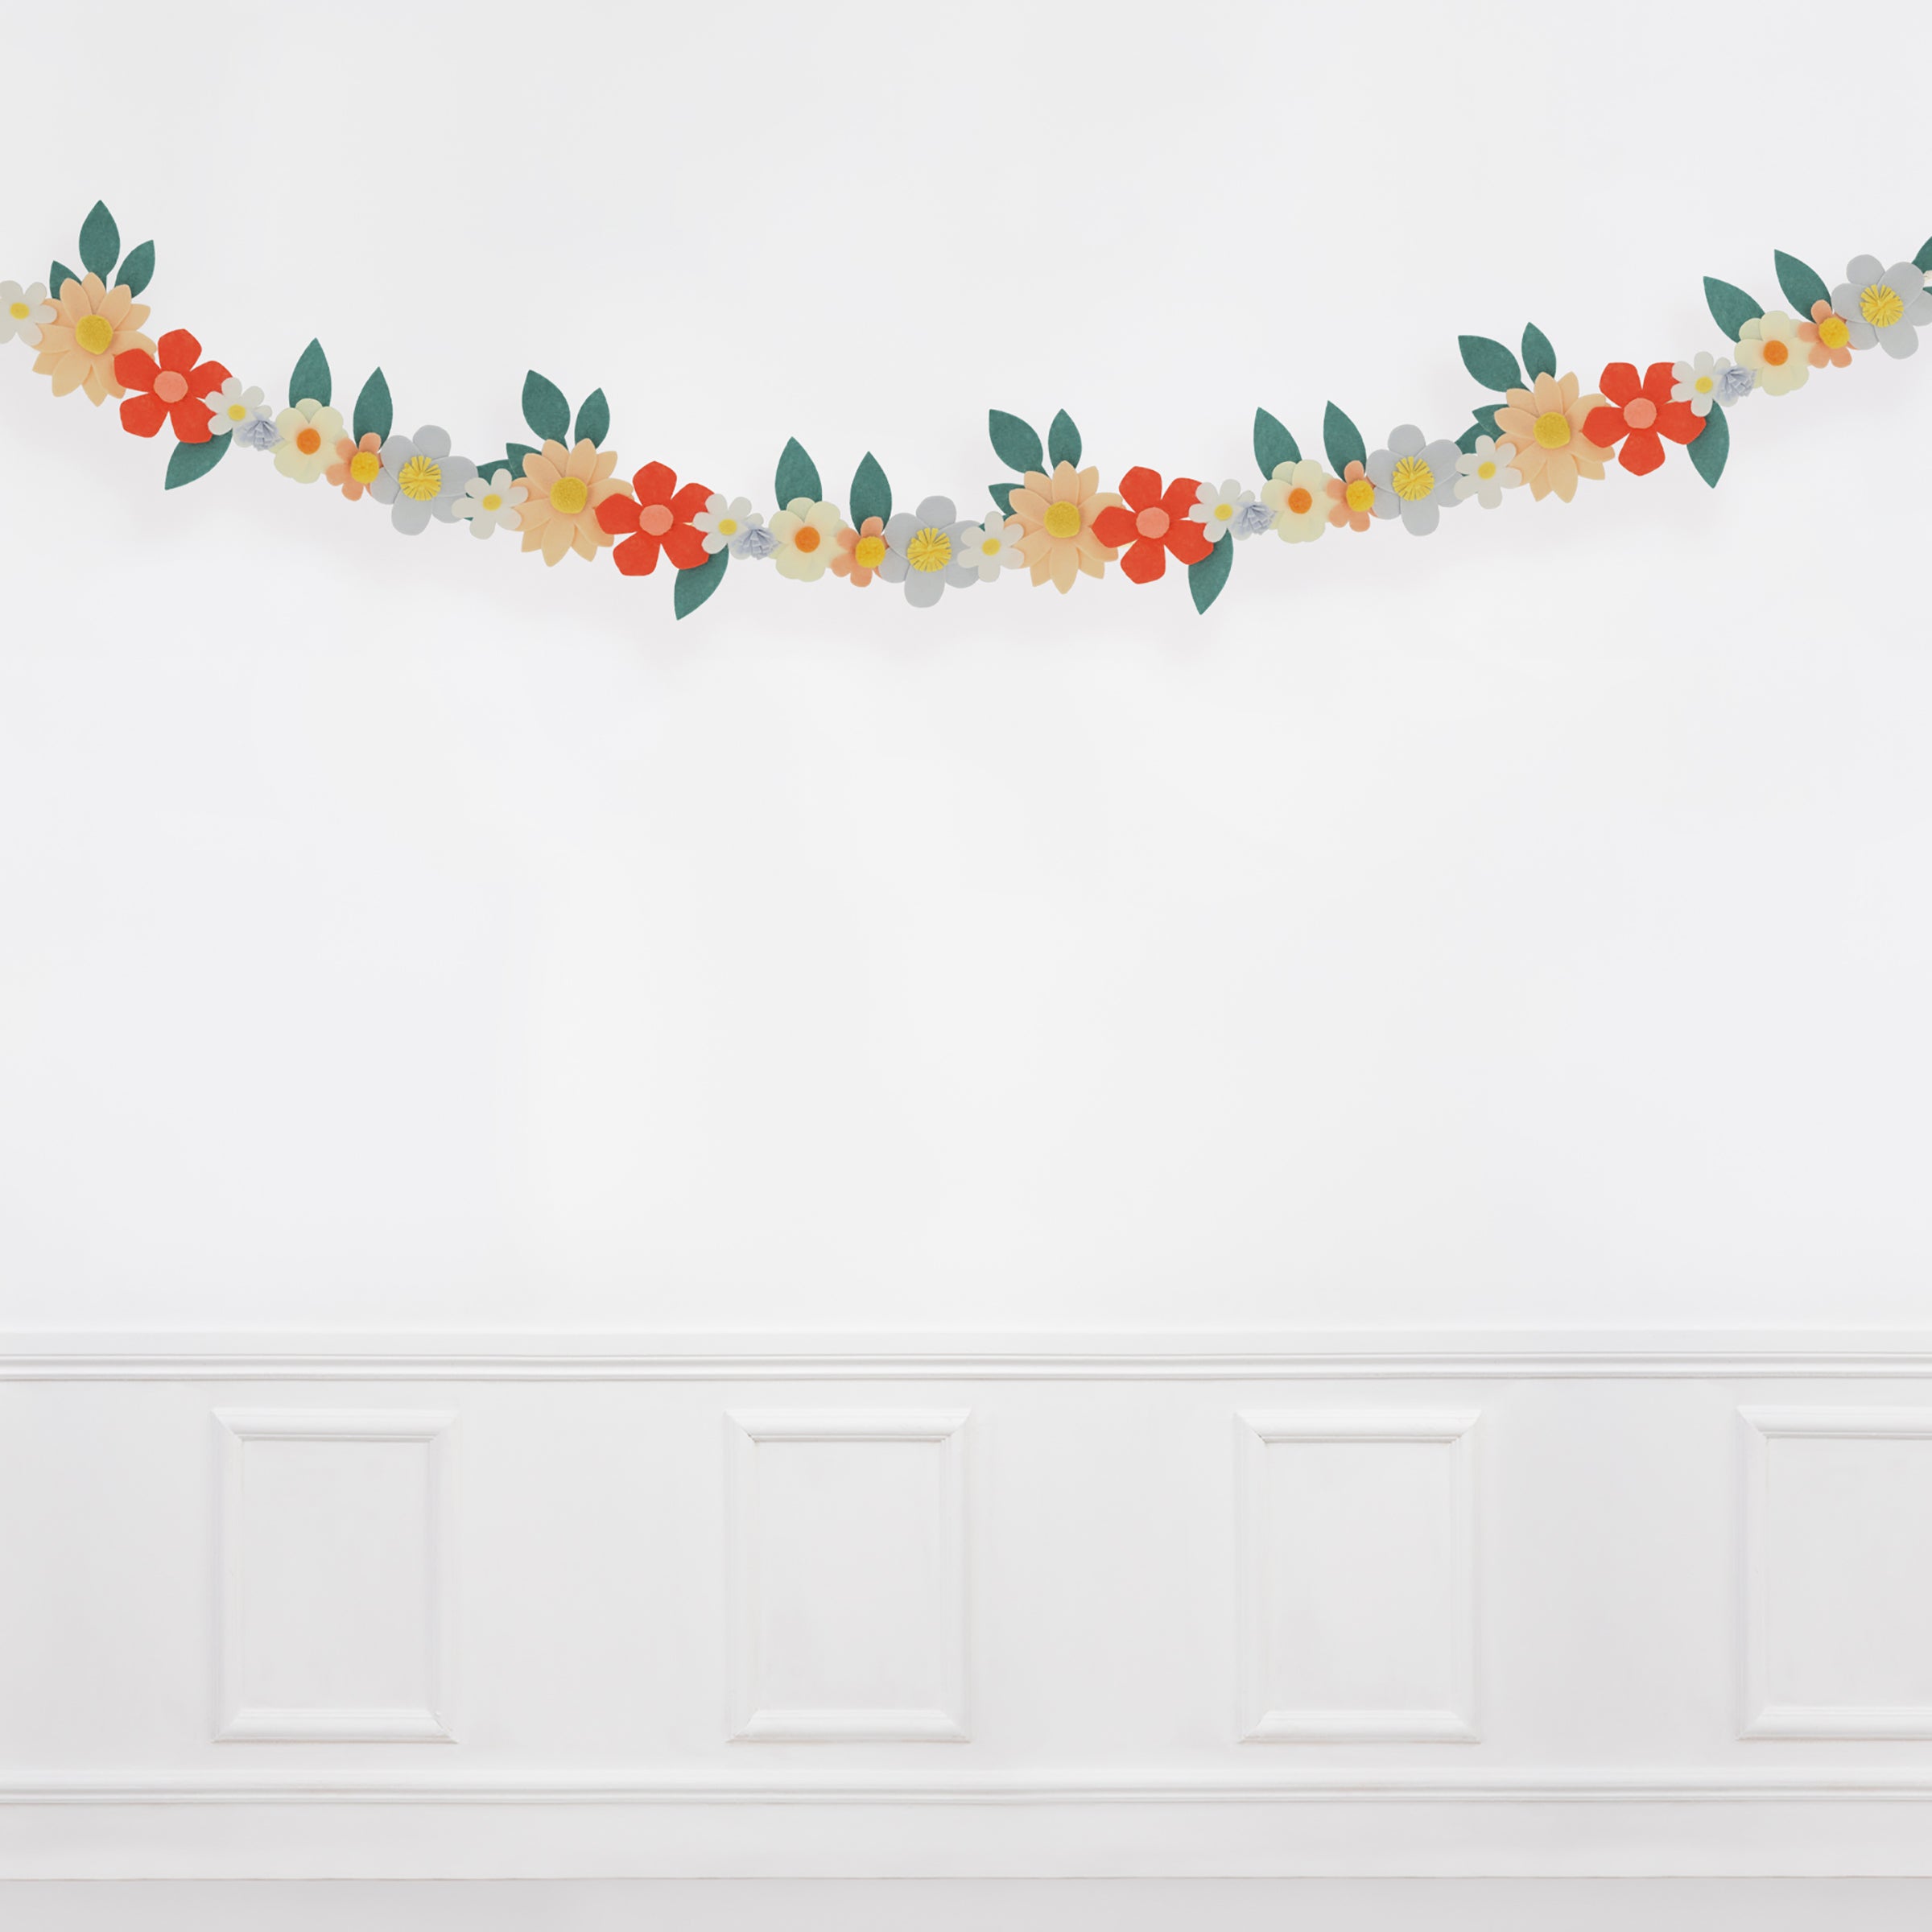 Our special party garland is crafted from felt, with flowers with pompom centers.